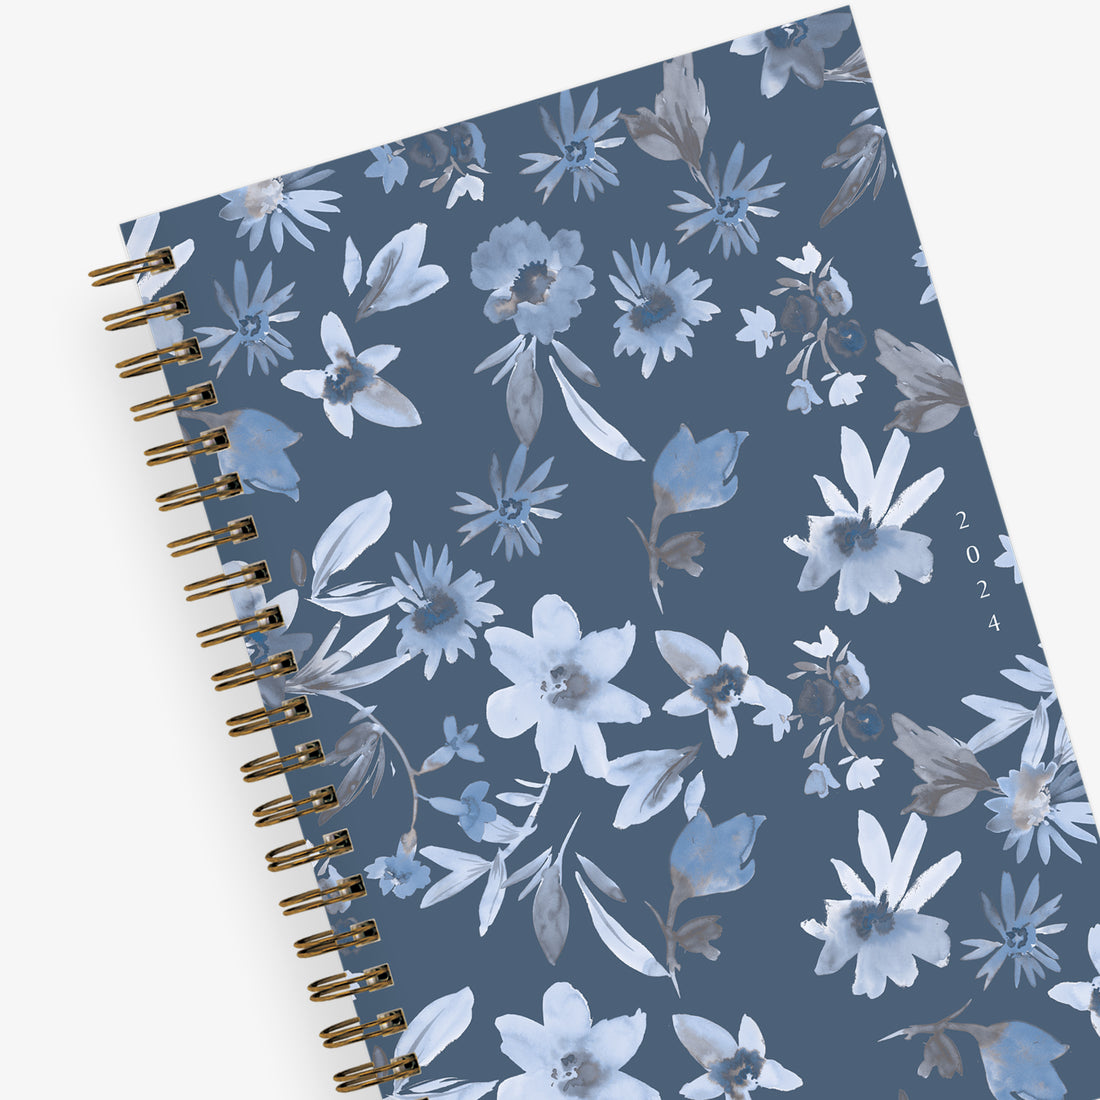 The Compass Rose - Personal Notebook Journal - 5x8 Inch - Blue